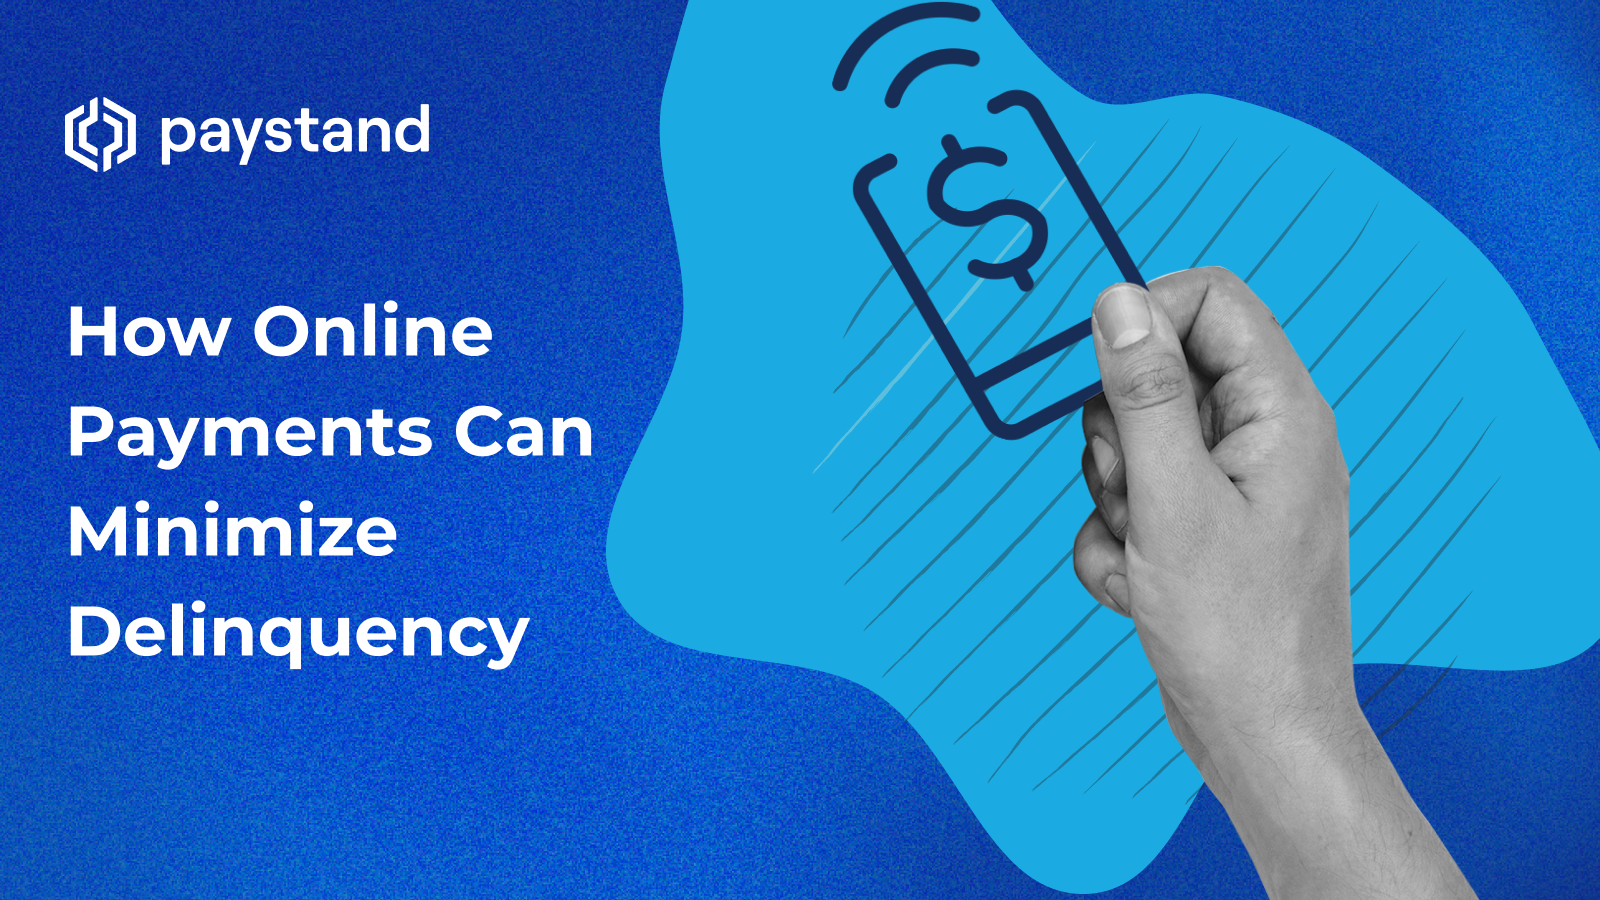 How Online Payments Can Minimize Delinquency